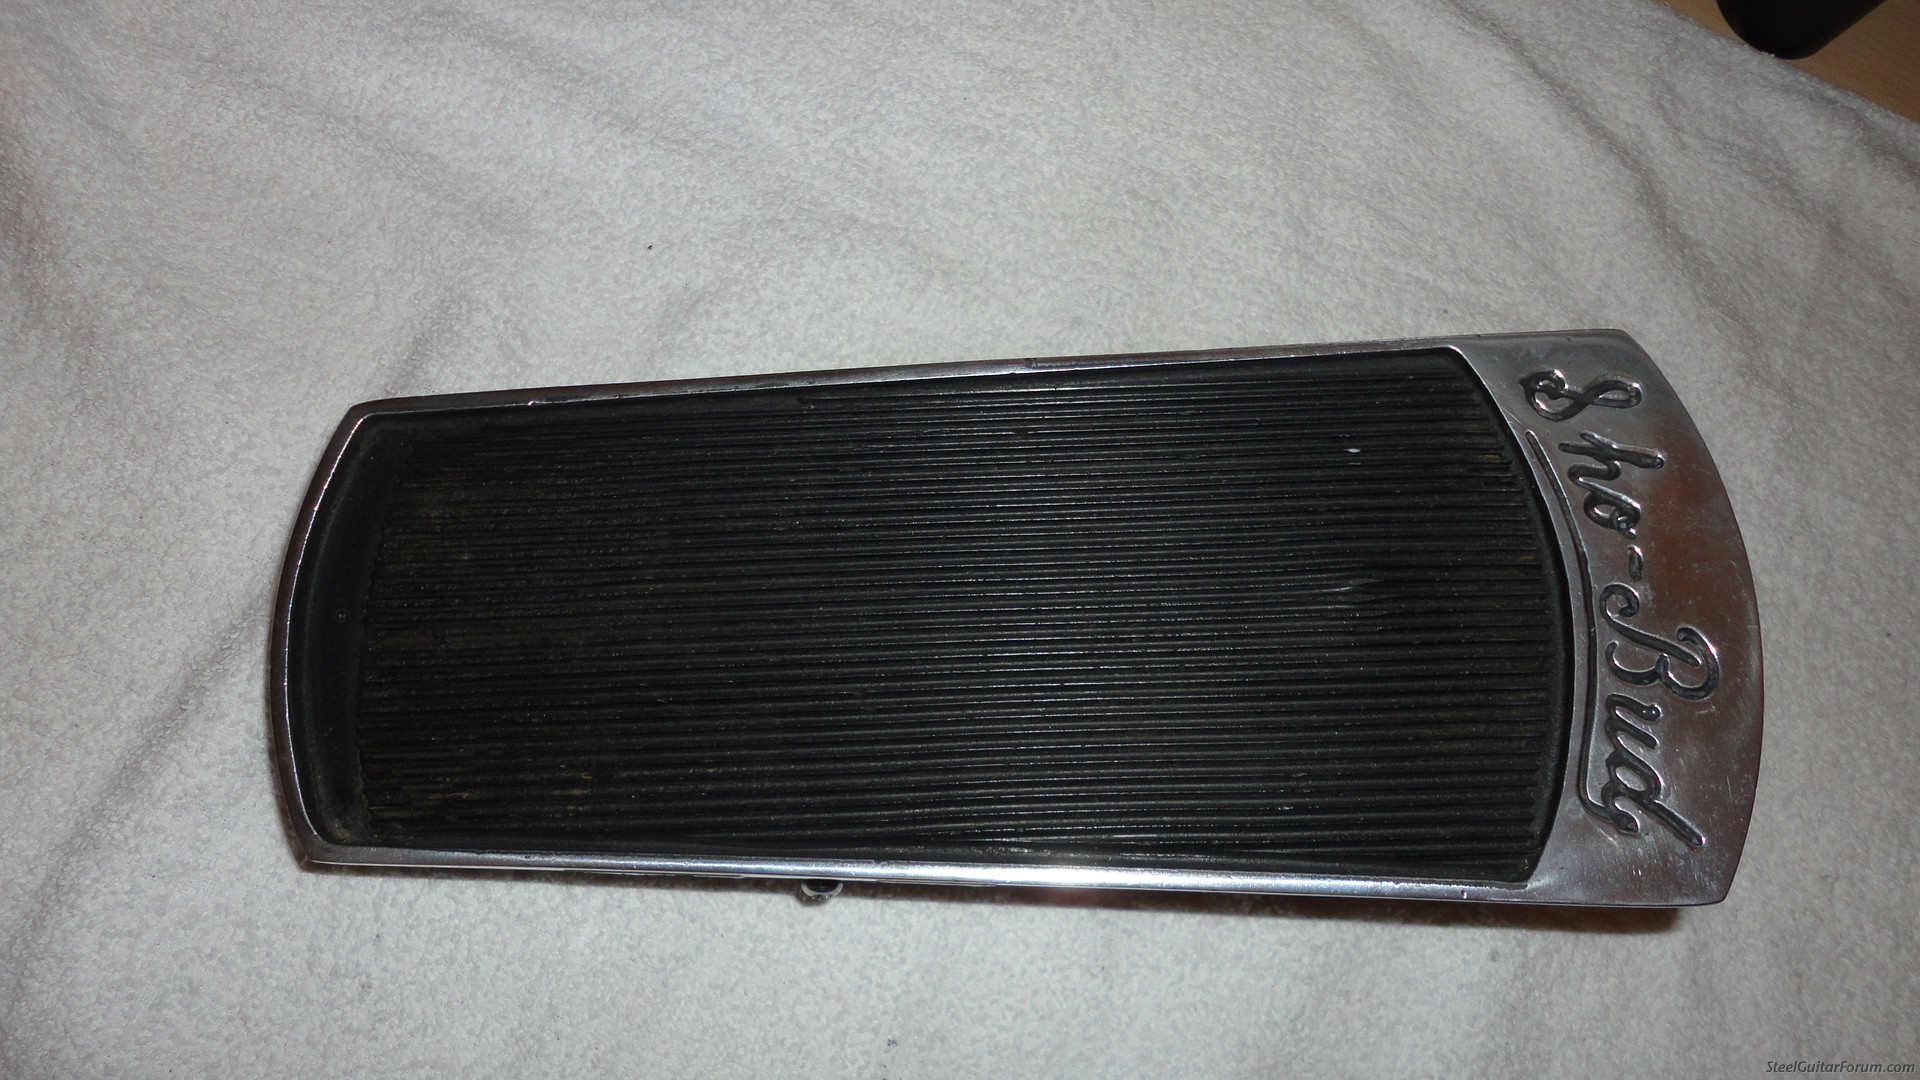 Sho Bud Volume Pedal for sale : The Steel Guitar Forum